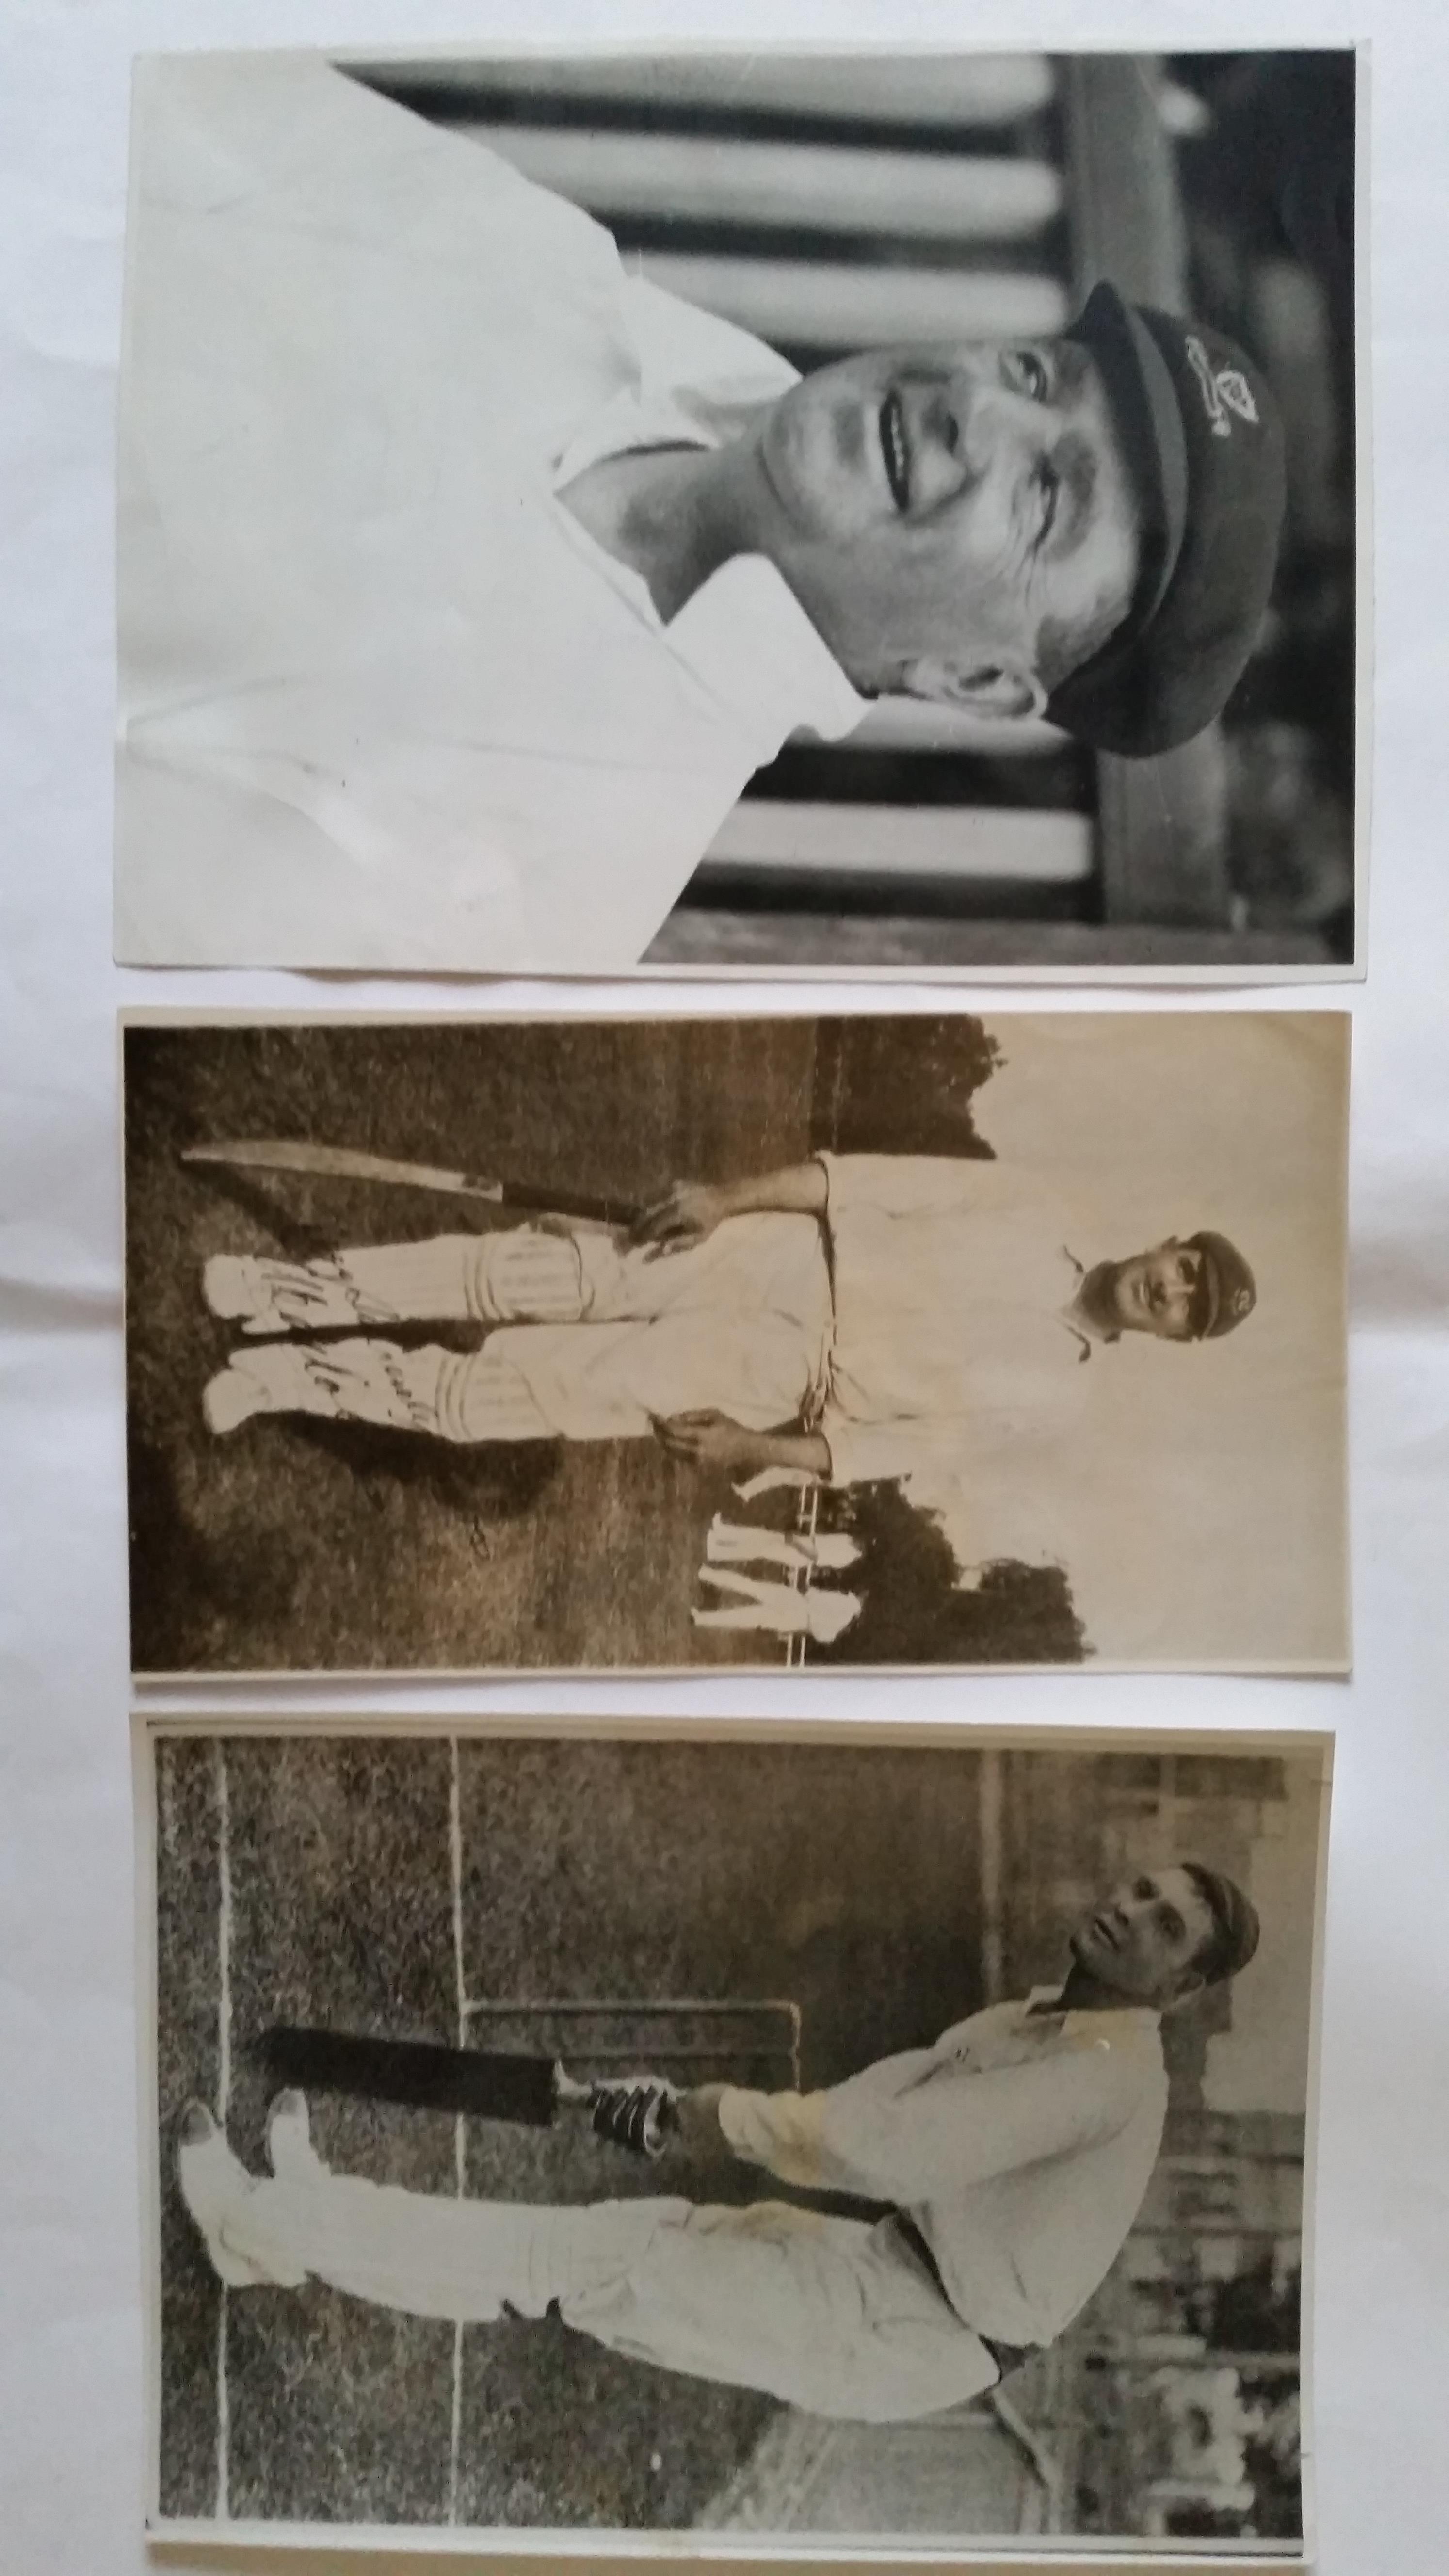 CRICKET, press photos, early Australians, showing C.J. Eady batting pose, Noble x2, Spofforth x2 - Image 3 of 4